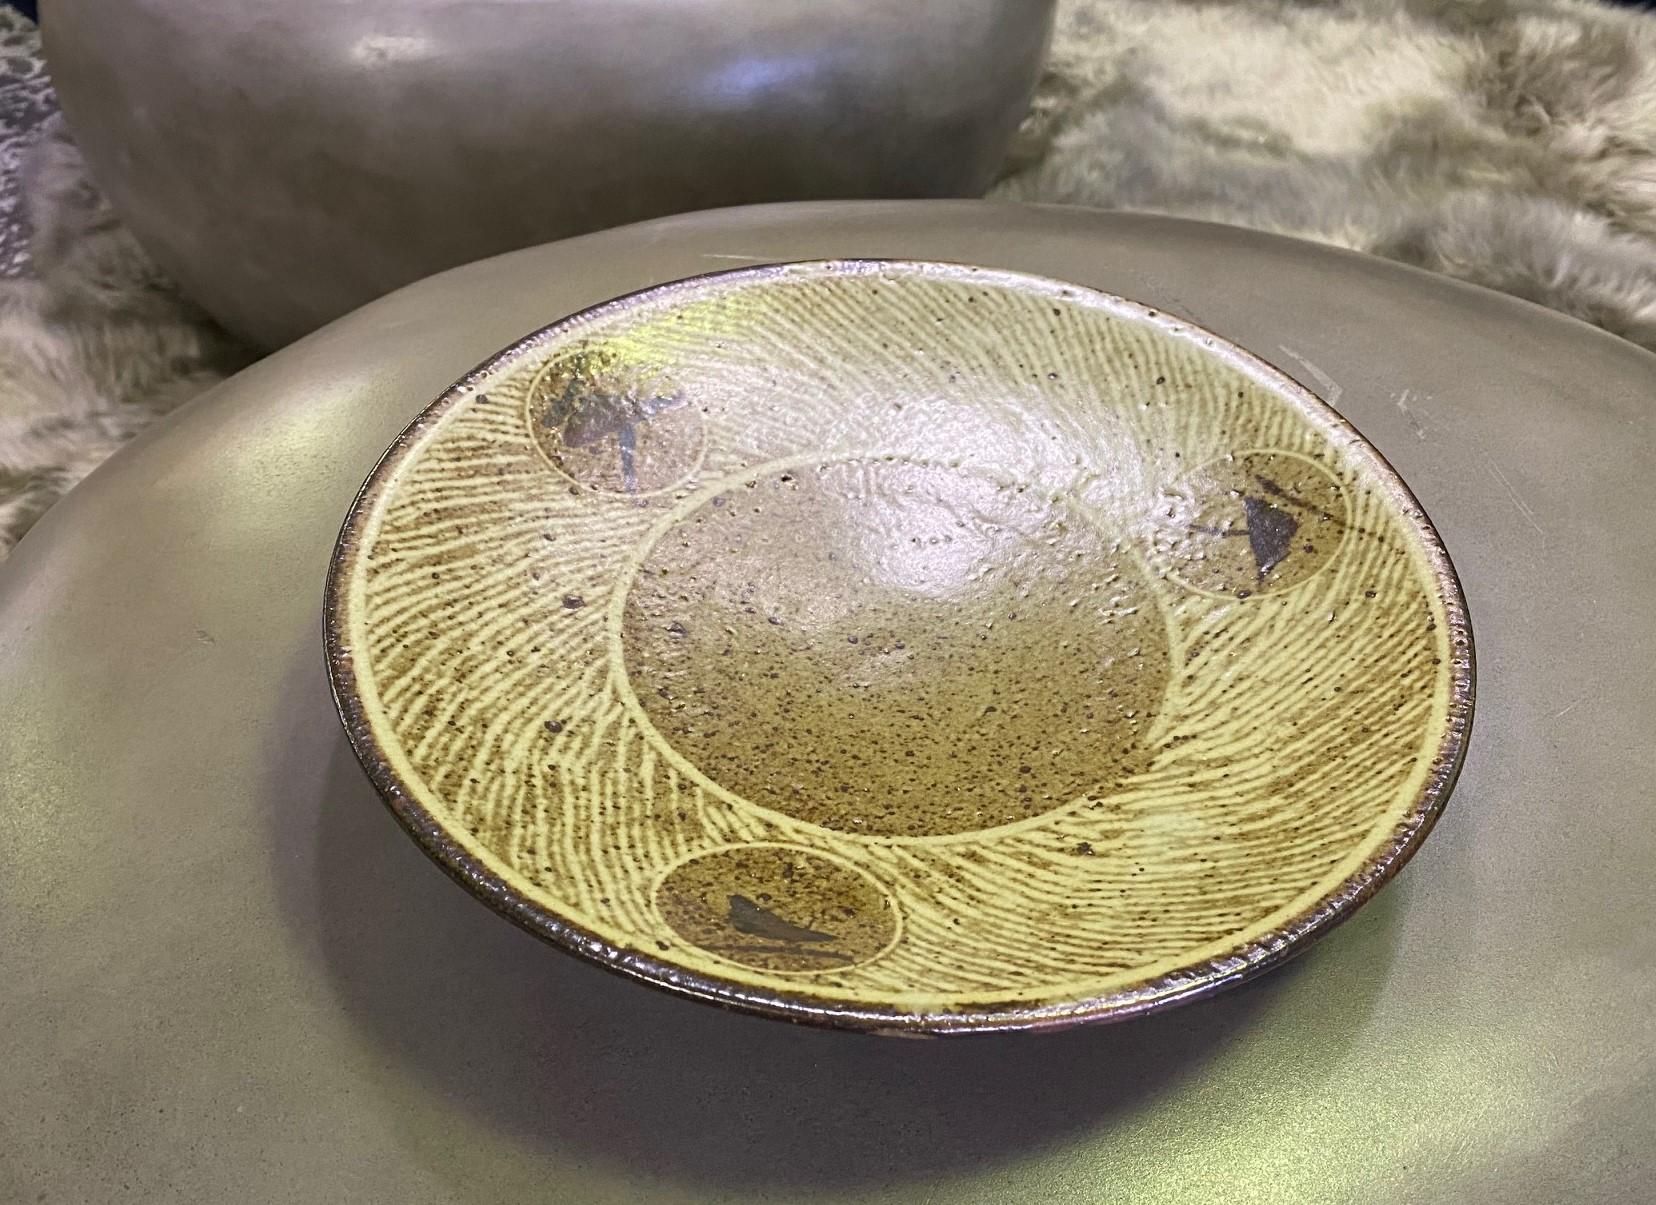 A wonderfully decorated and executed ceramic plate/ low bowl by Japanese National Treasure pottery master Tatsuzo Shimaoka. This work exhibits his signature rope inlay, cord pattern decoration technique, and displays his impressed 